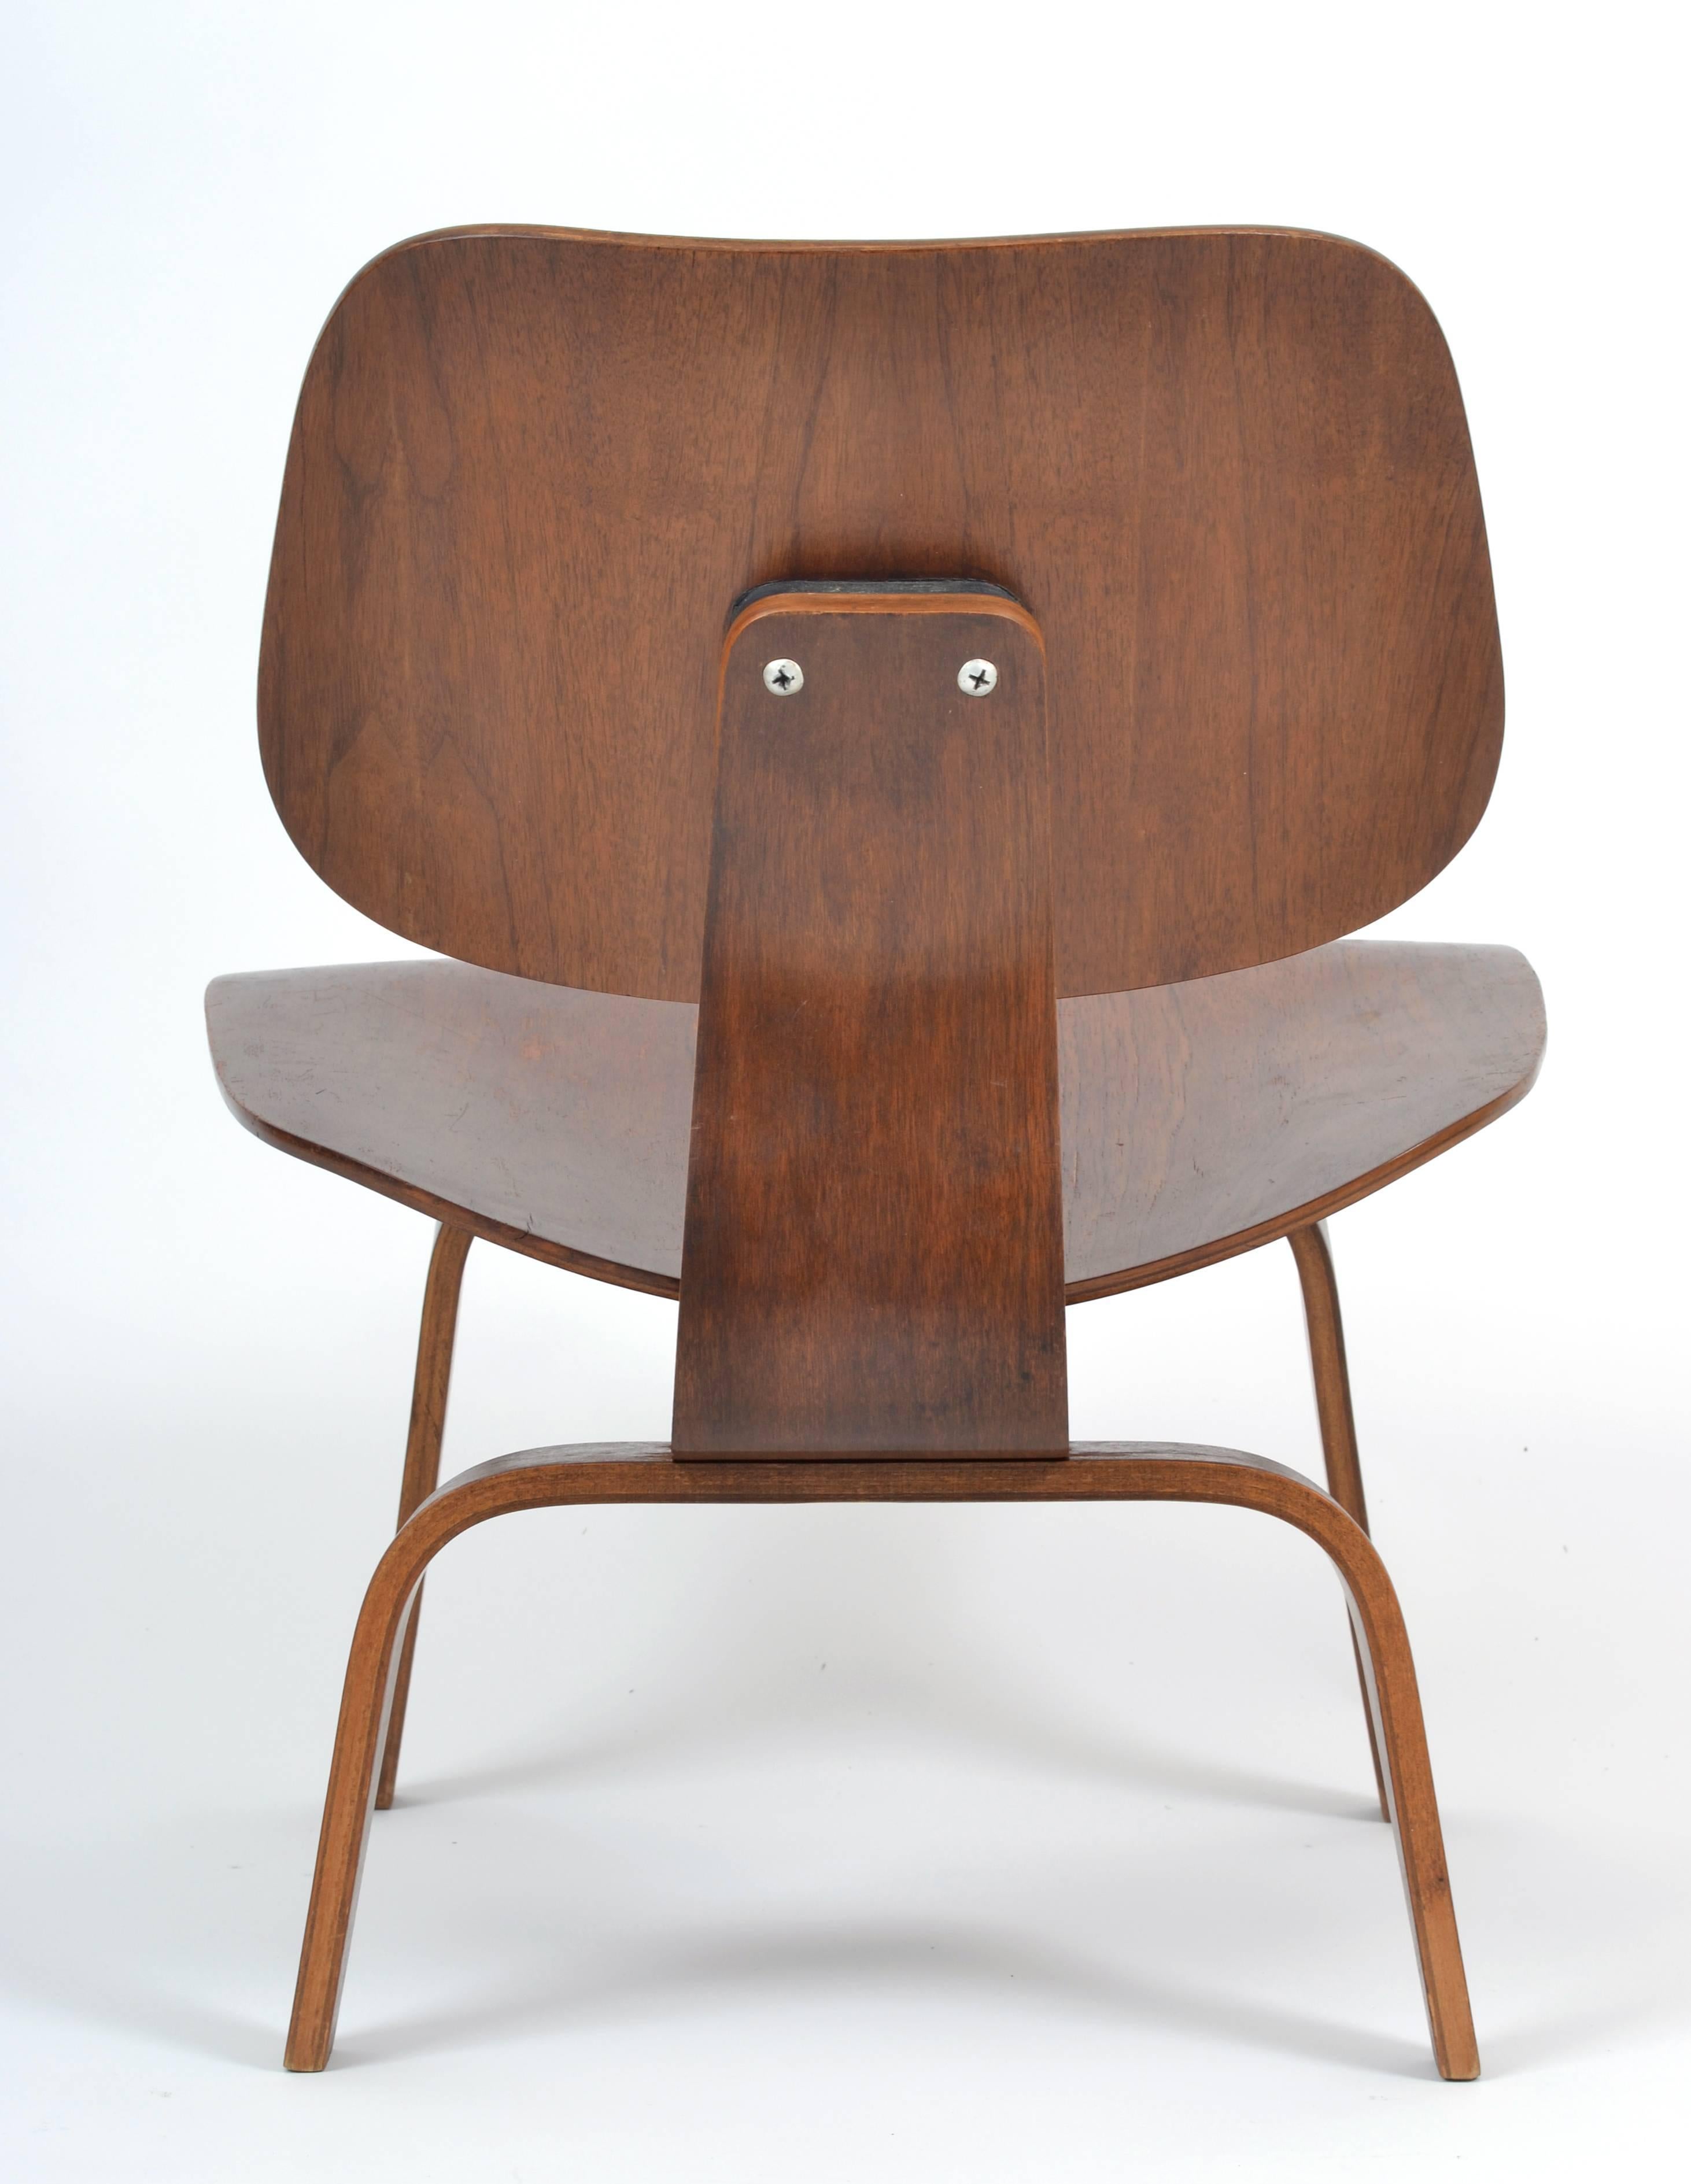 American Herman Miller Walnut Evans LCW Lounge Chair by Charles and Ray Eames, 1940's